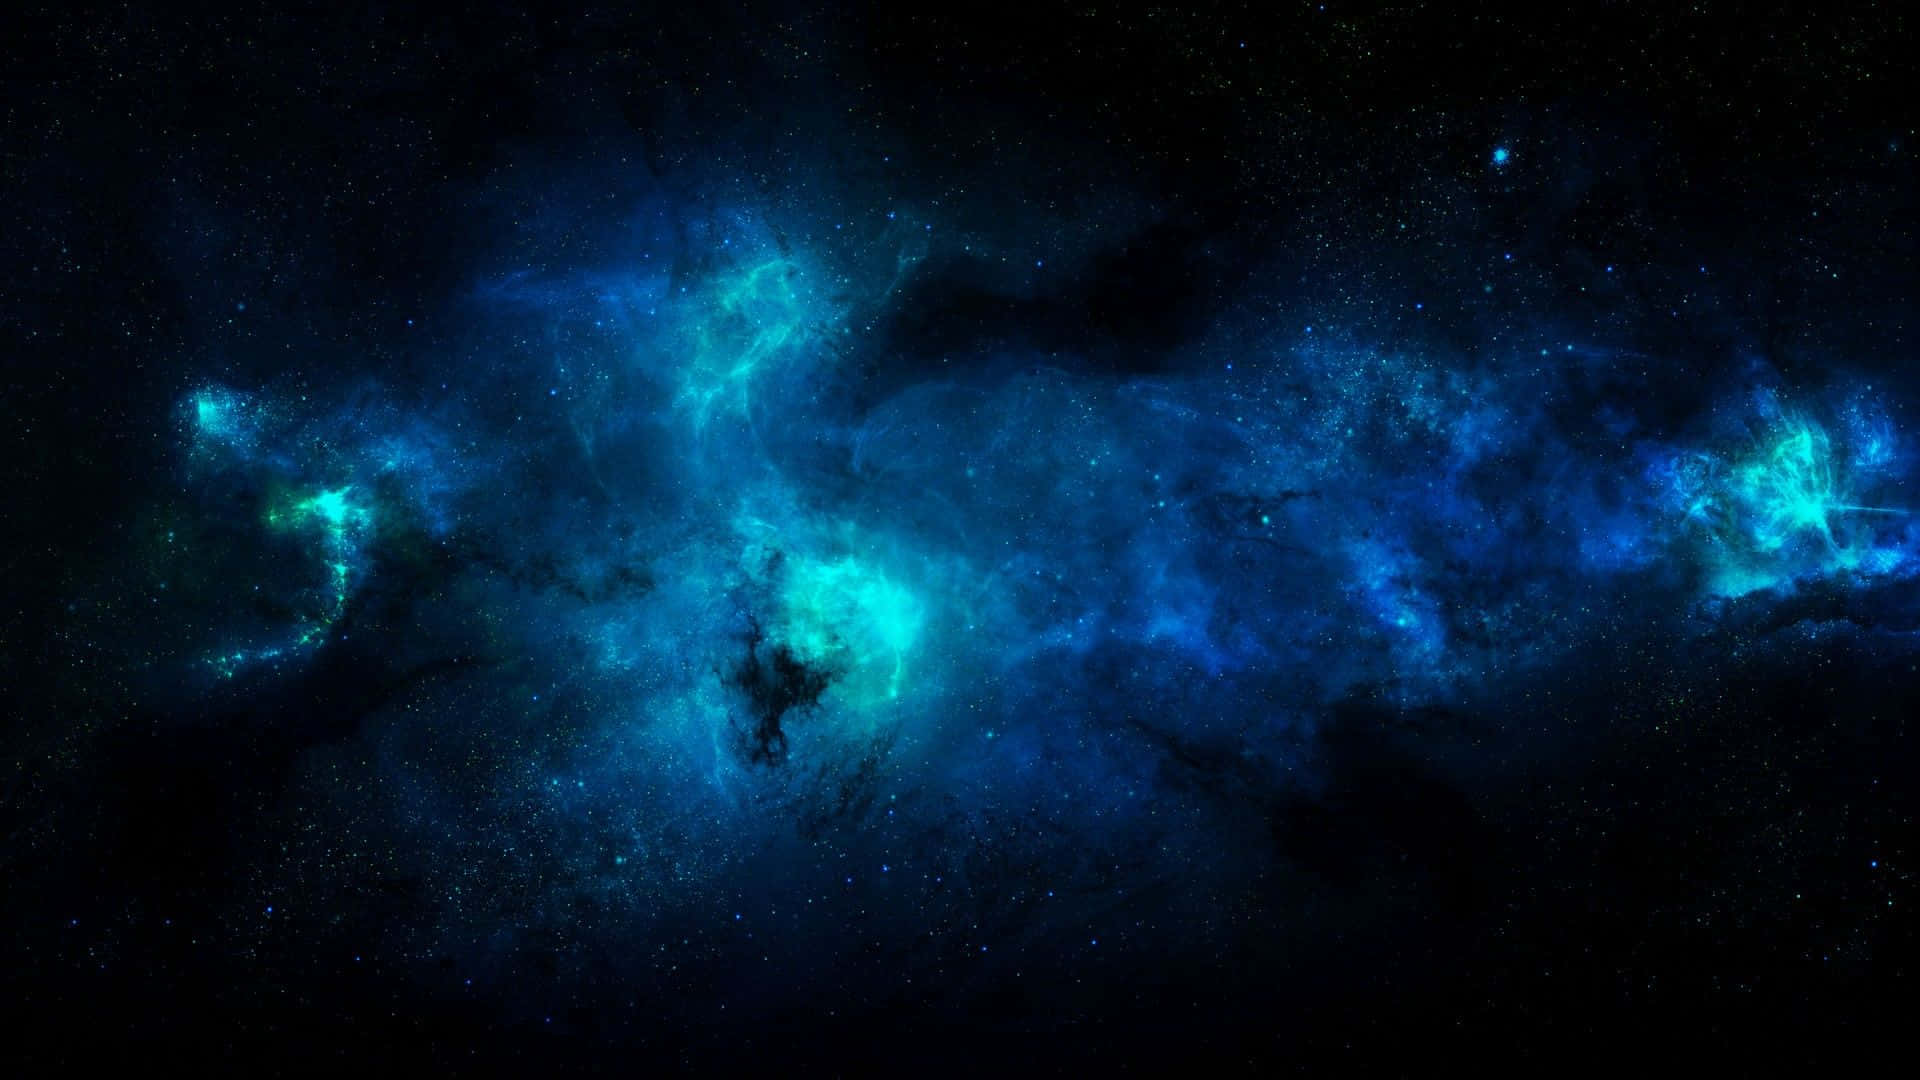 A Lonely Representation Of Beauty And Serenity, This Cool Blue Galaxy Is Sure To Transport You To Another Universe. Wallpaper